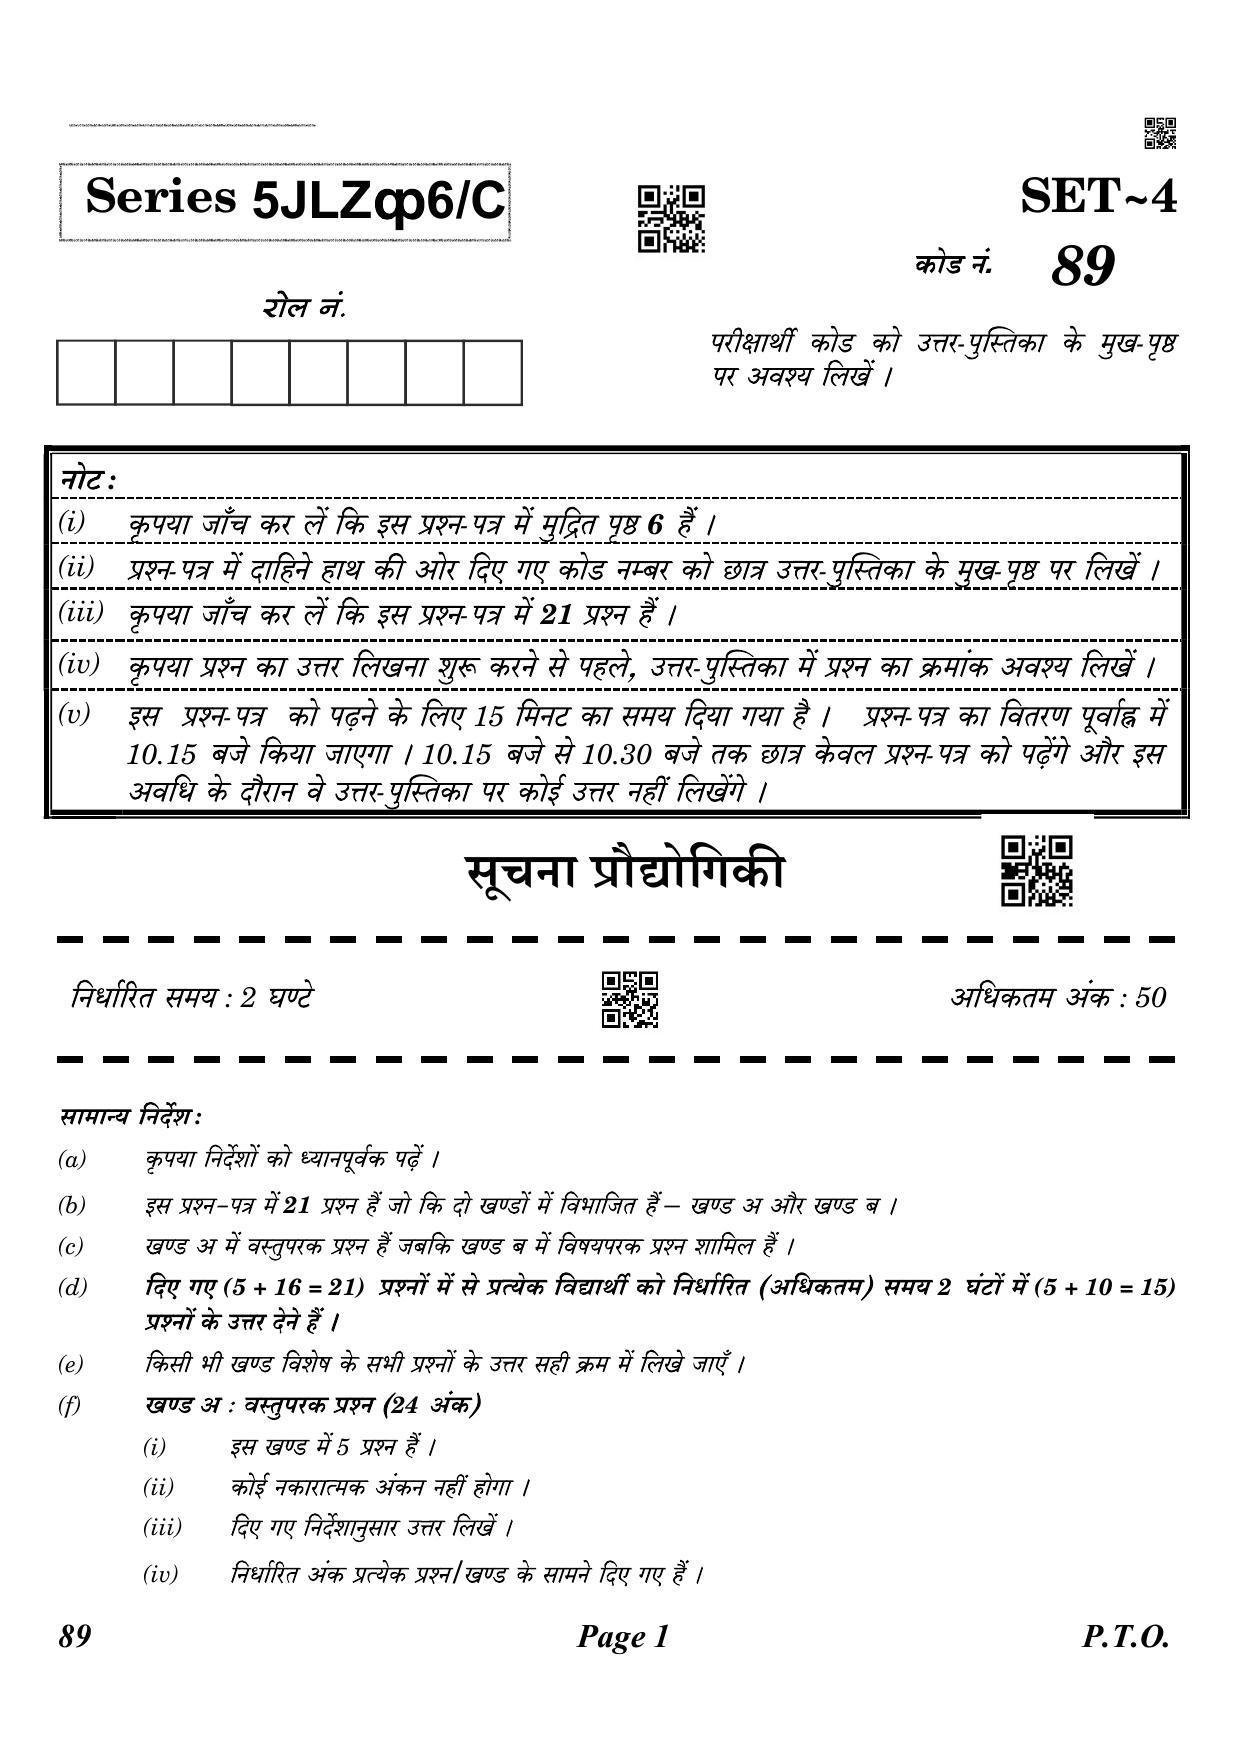 CBSE Class 10 QP_402_INFORMATION_TECH_HINDI 2021 Compartment Question Paper - Page 1